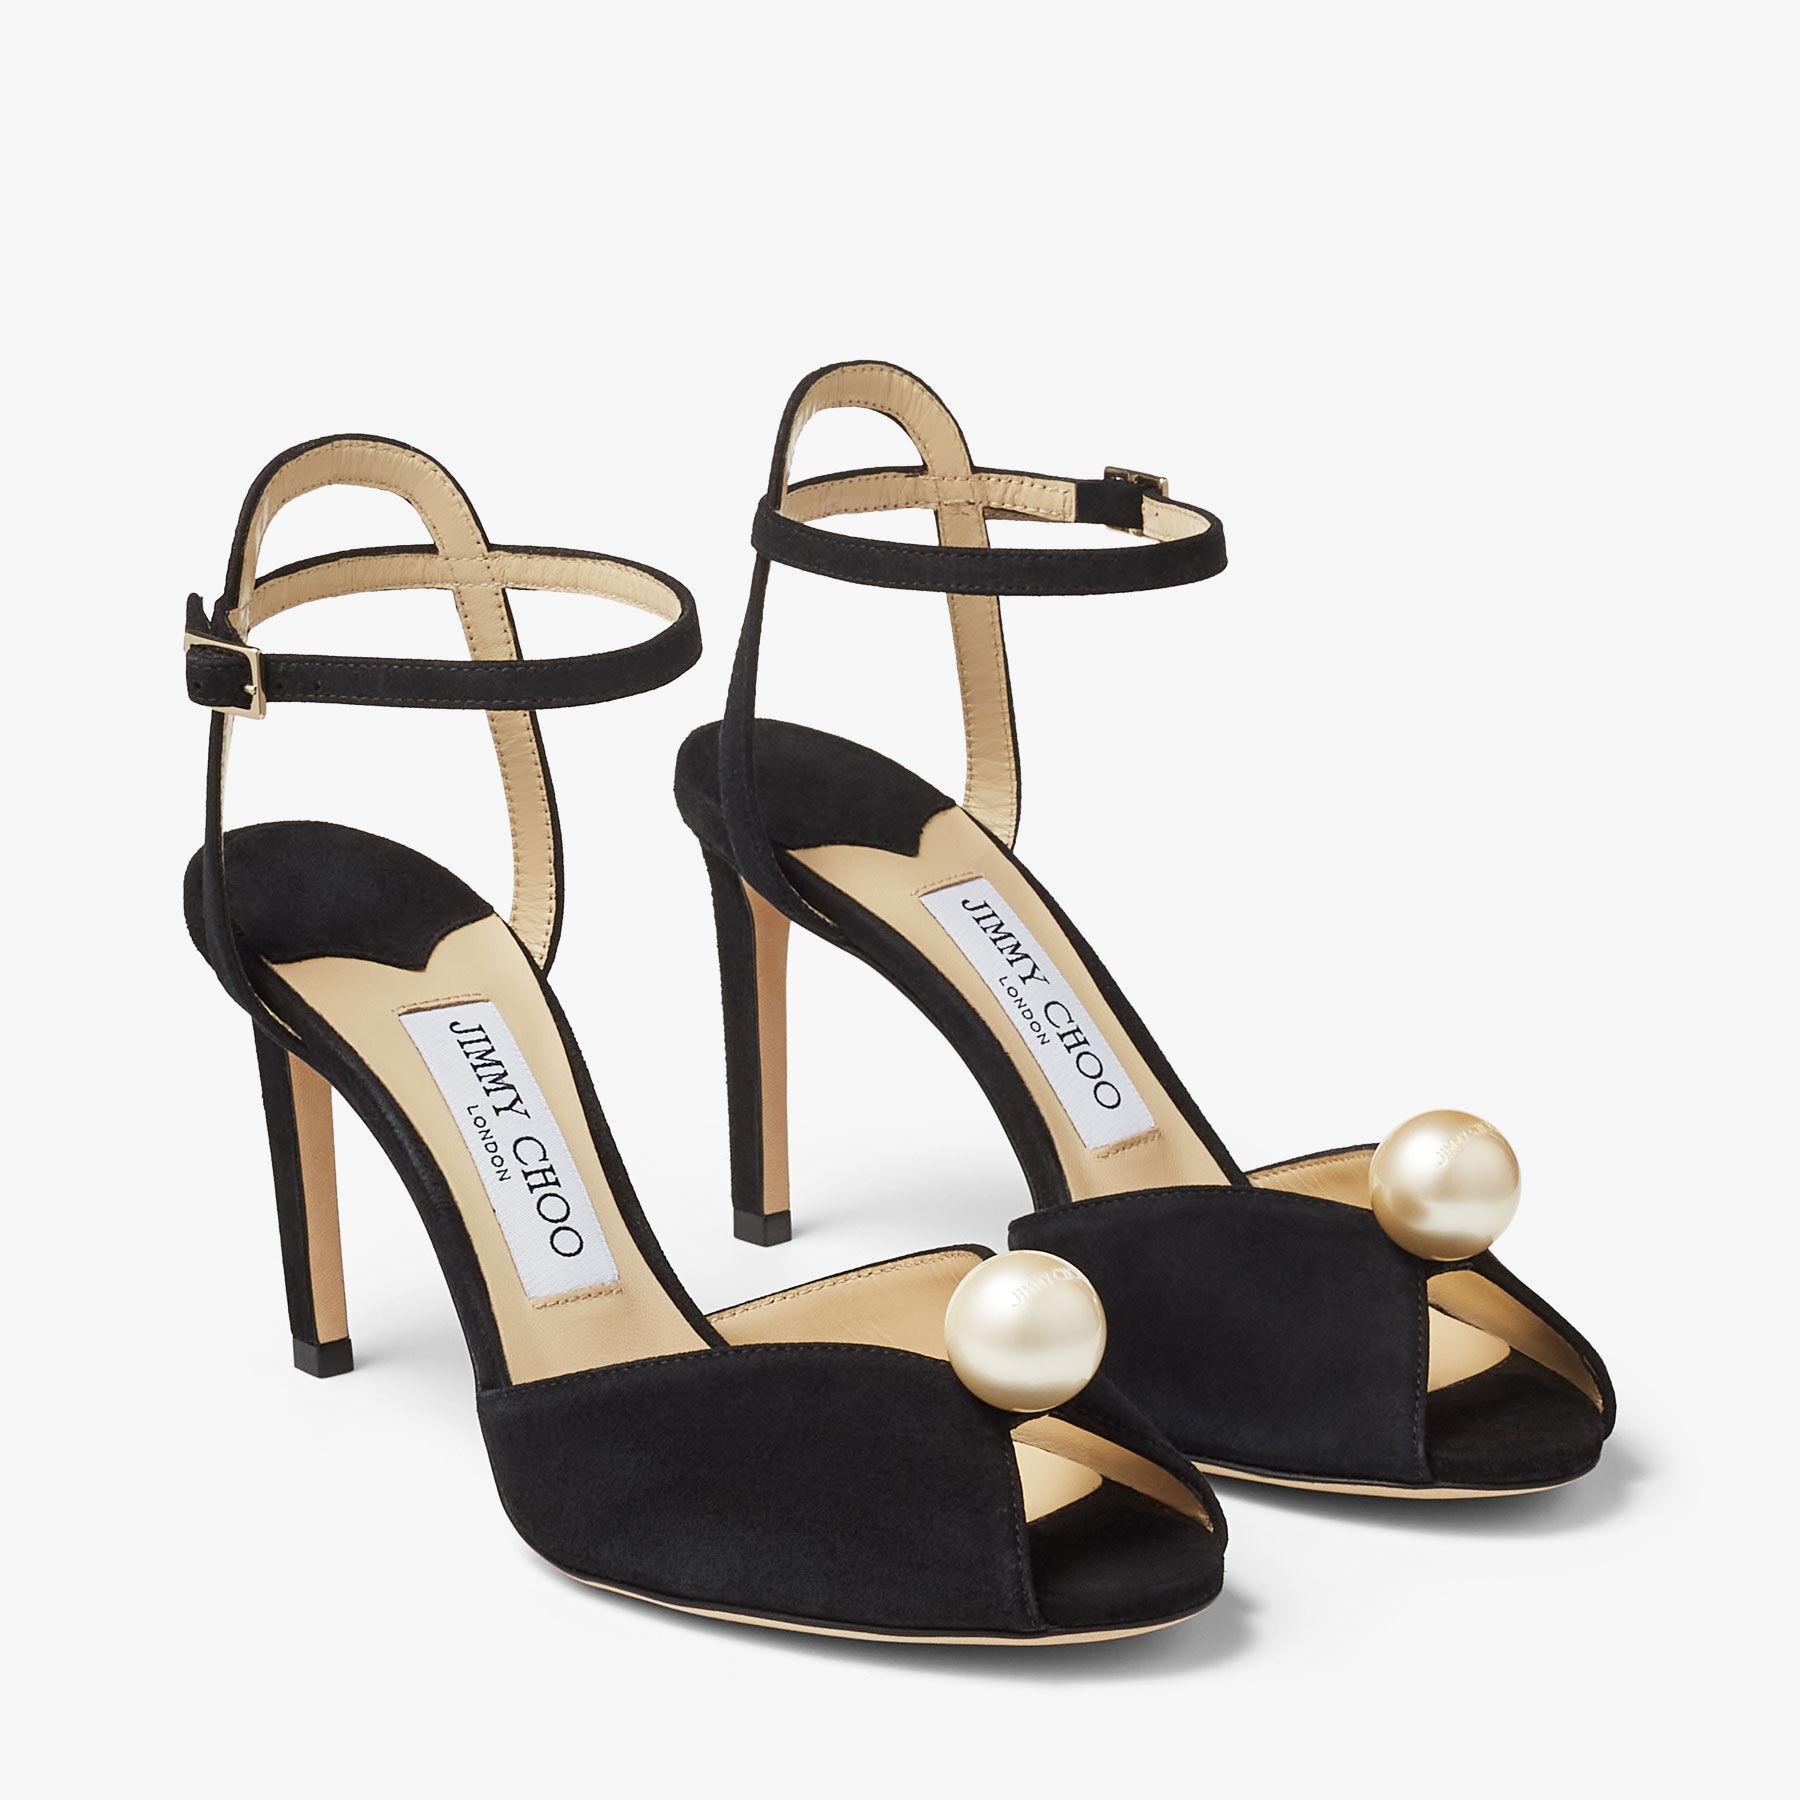 Sacora 85
Black Suede Sandals with Pearl Embellishment - 3